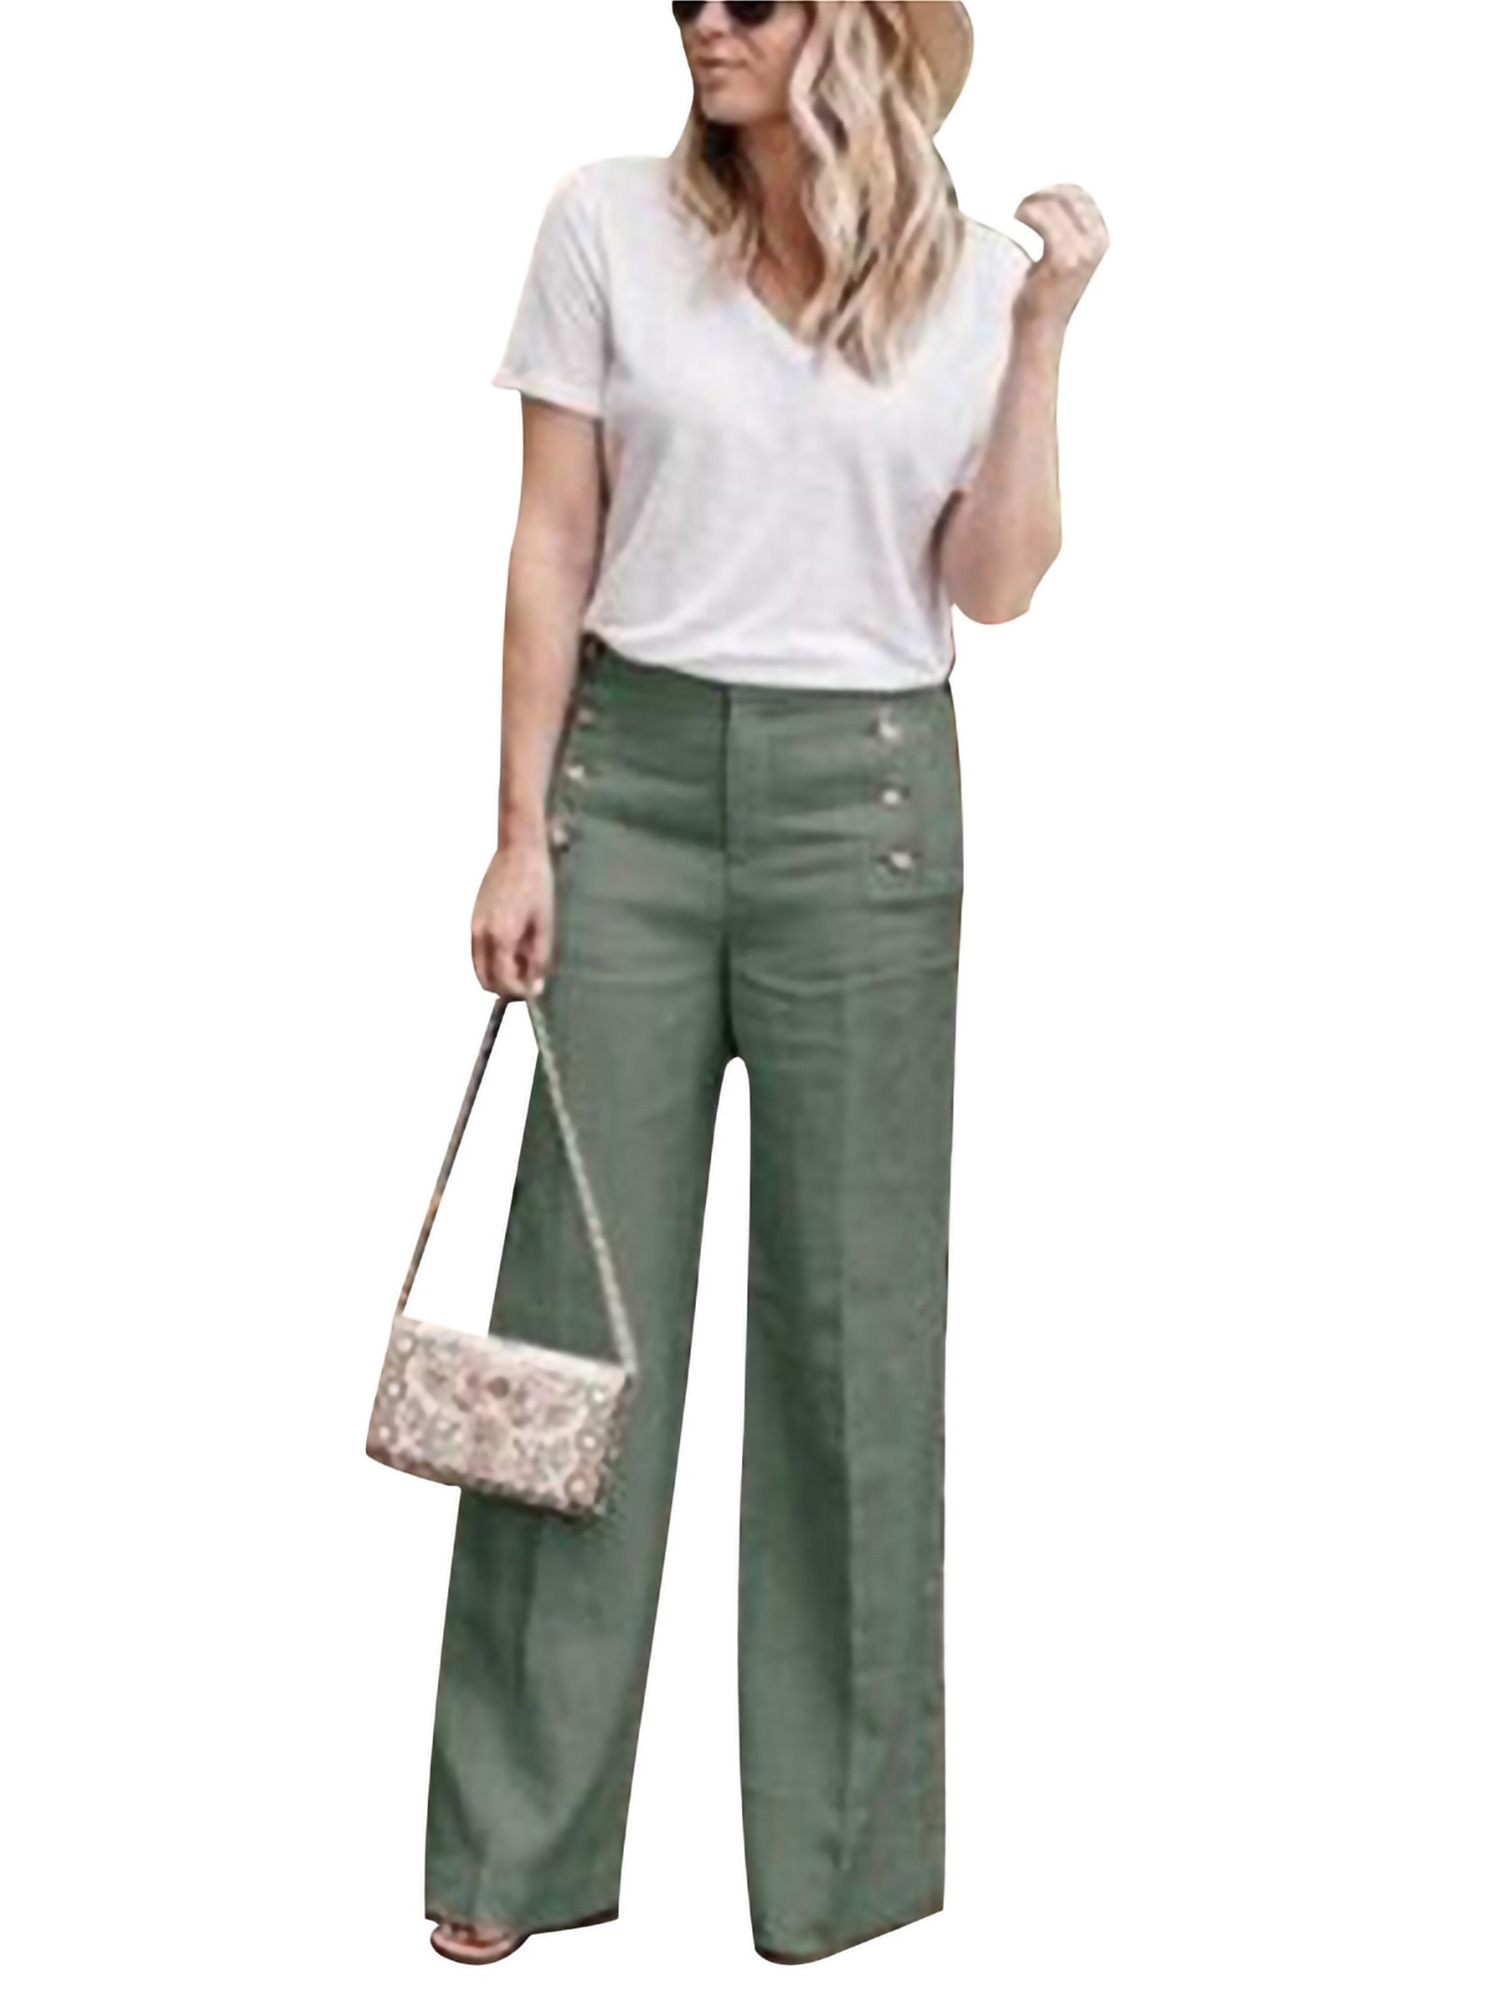 Women's High Waist Wide Leg Palazzo Pants OL Button Long Pants Solid Color Casual Loose Office Work Pants Trousers - image 1 of 2